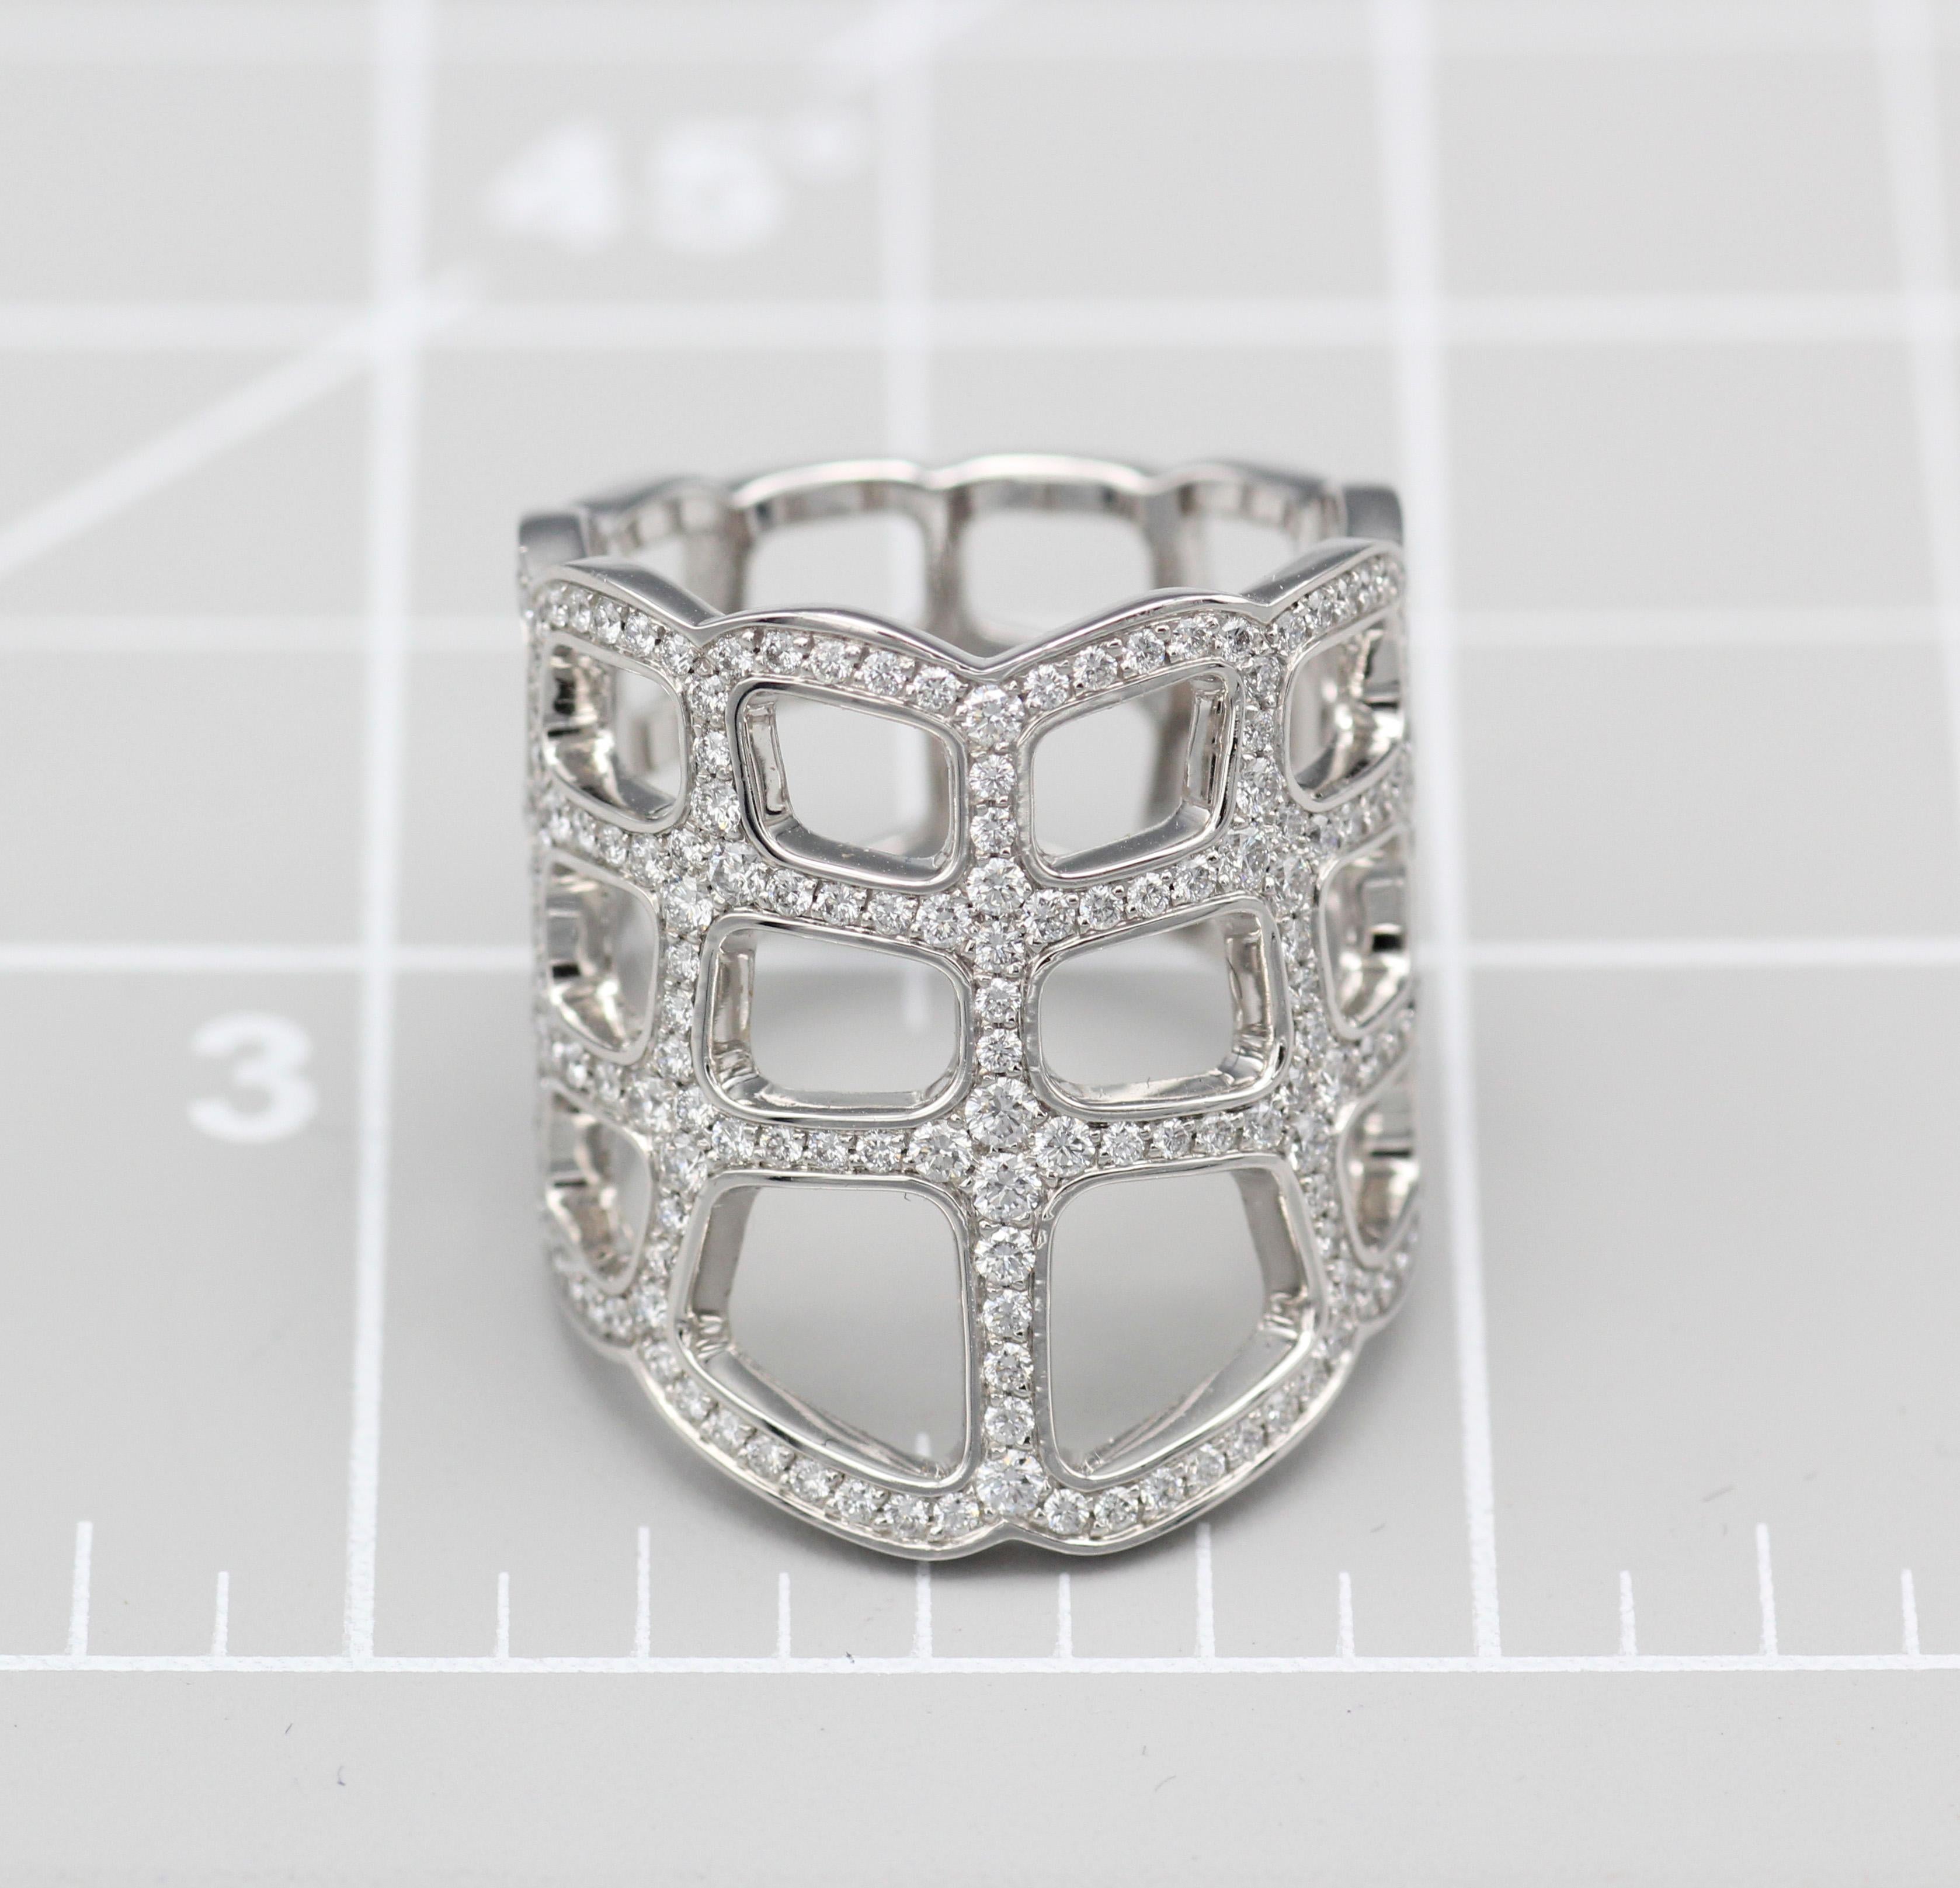 Hermes Niloticus Ombre Diamond 18k White Gold Ring Size 6.5 For Sale 2